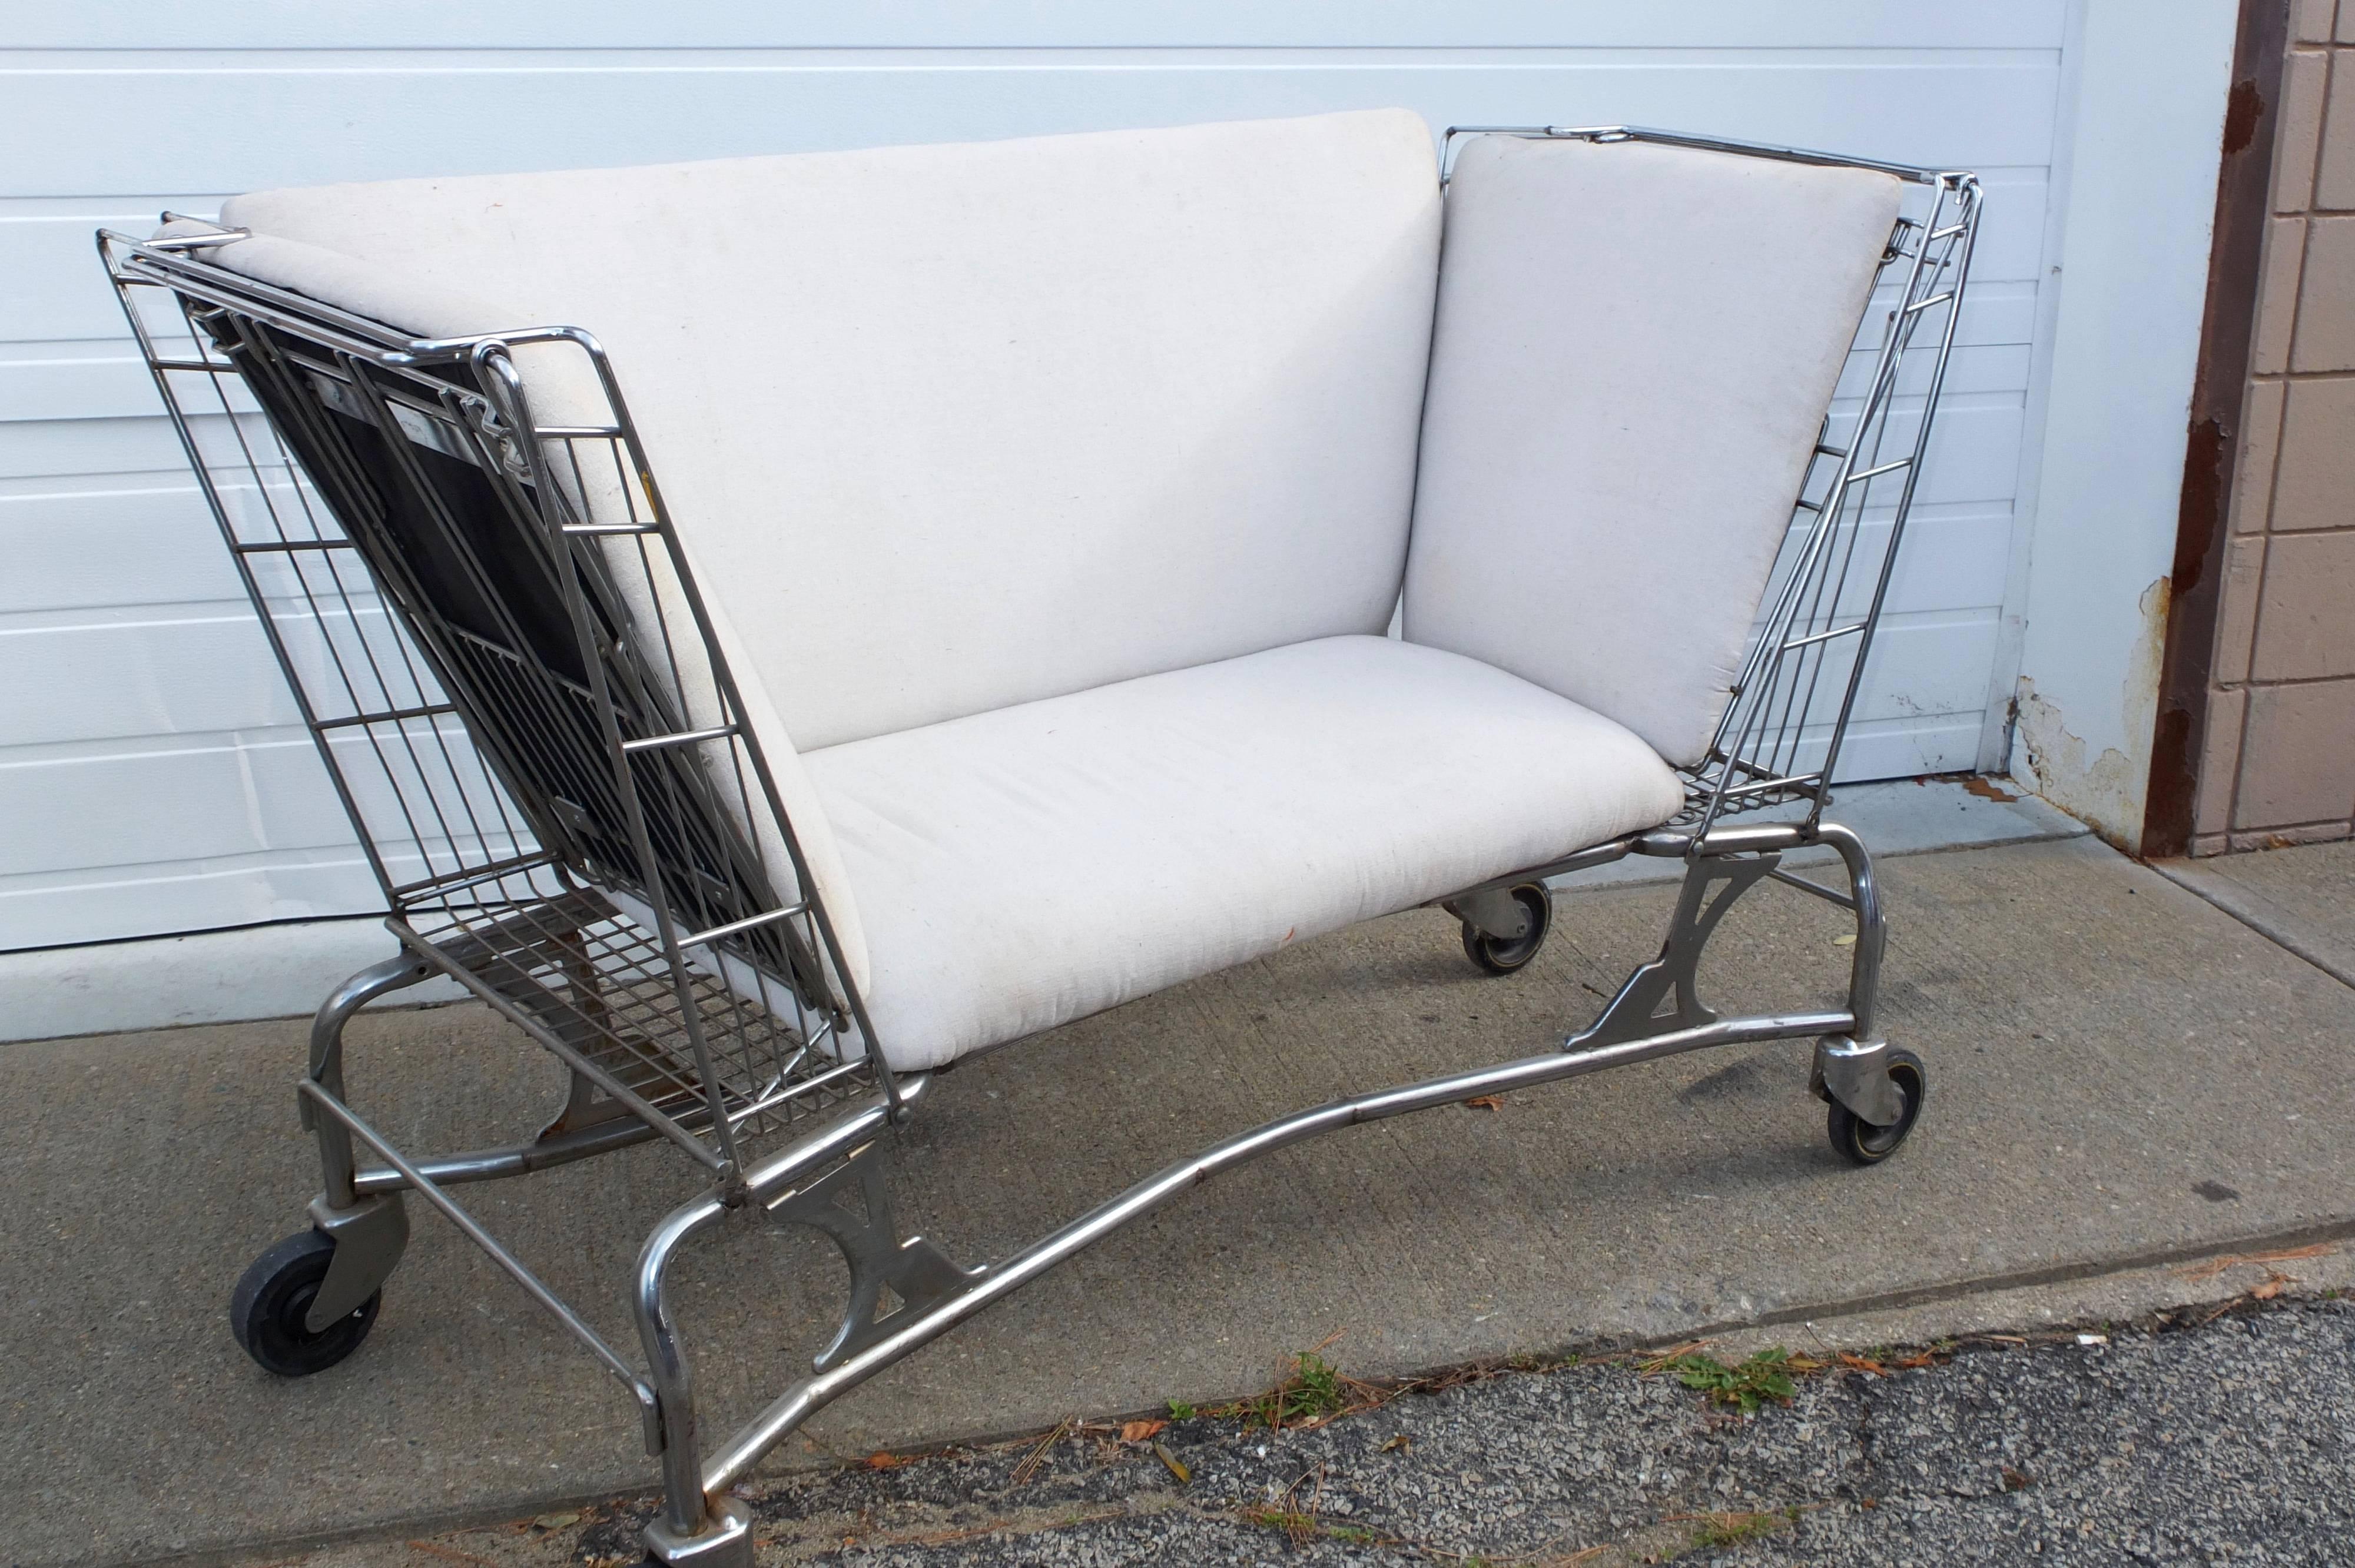 This is a one-of-a-kind creation salvage recycle of found objects by Industrial artist and welder, Doug Meyer, crafted by hand out of two vintage Mid-Century chromed steel shopping carts. 
Perfectly balanced, going and coming!
The seat, back and